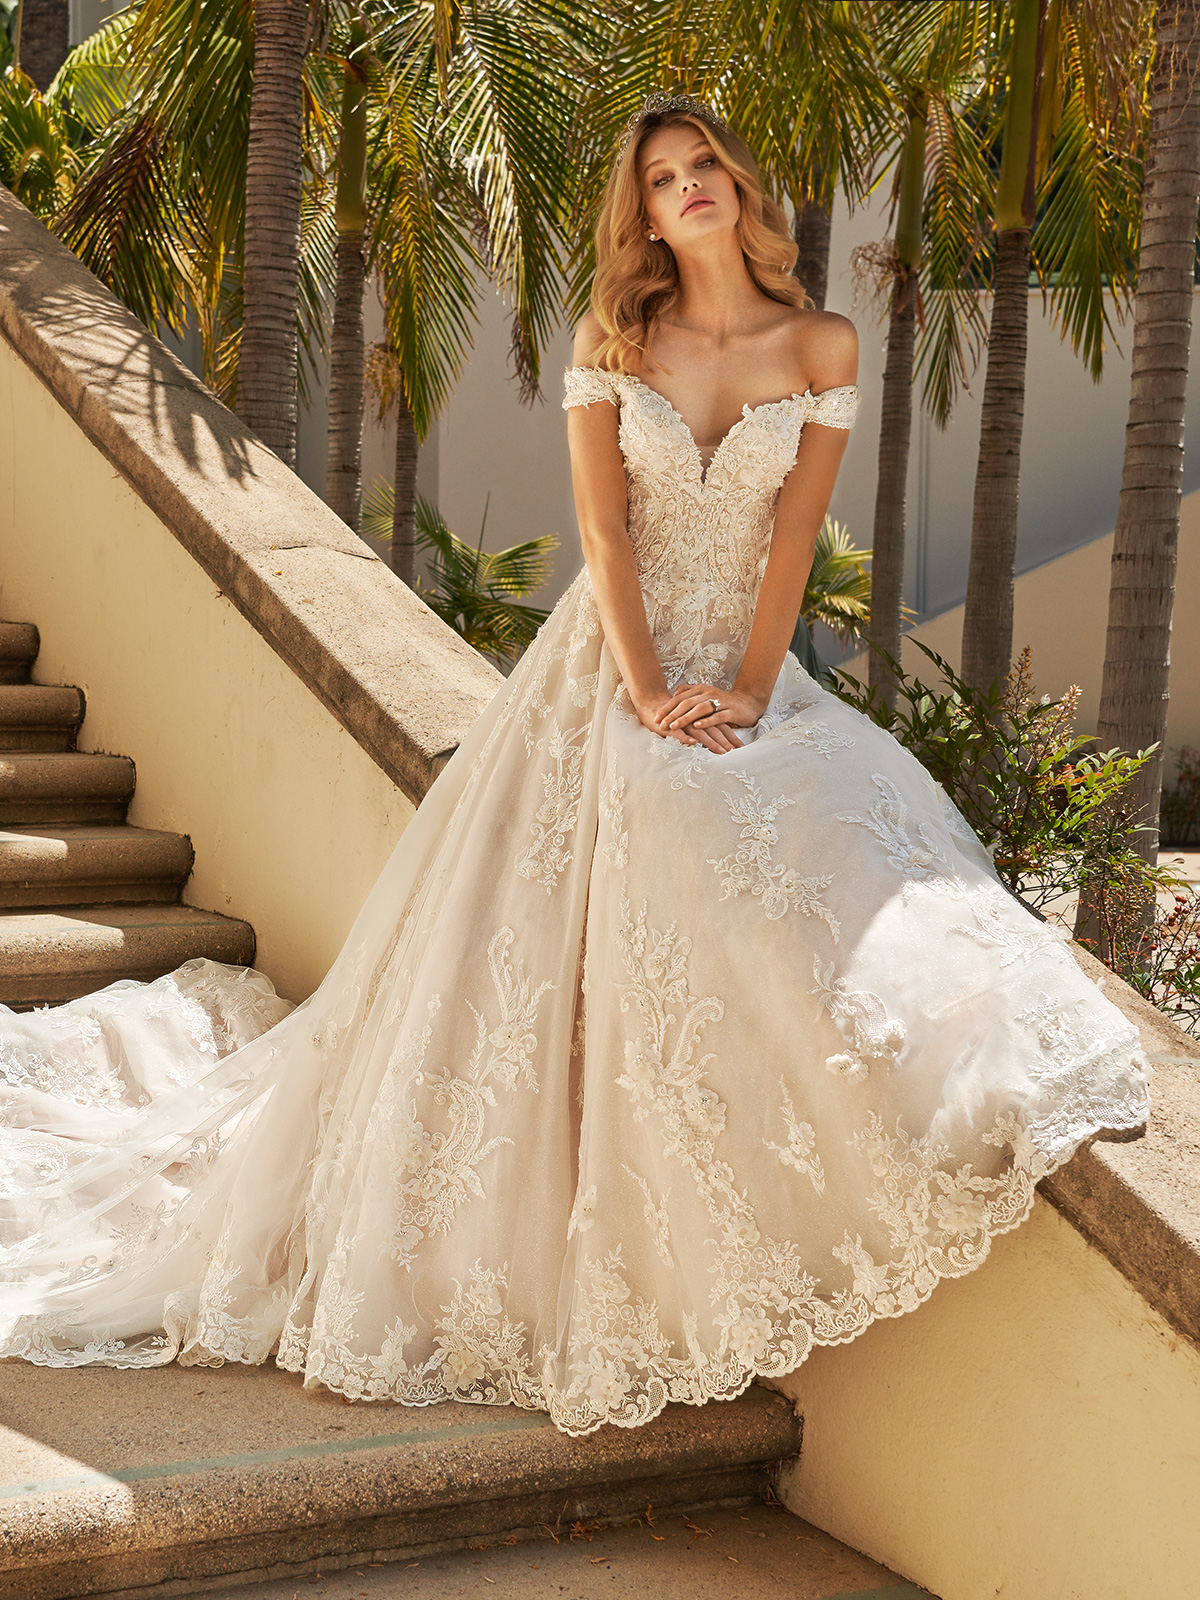 Wedding dress guide for petite with large bust - Petite Dressing